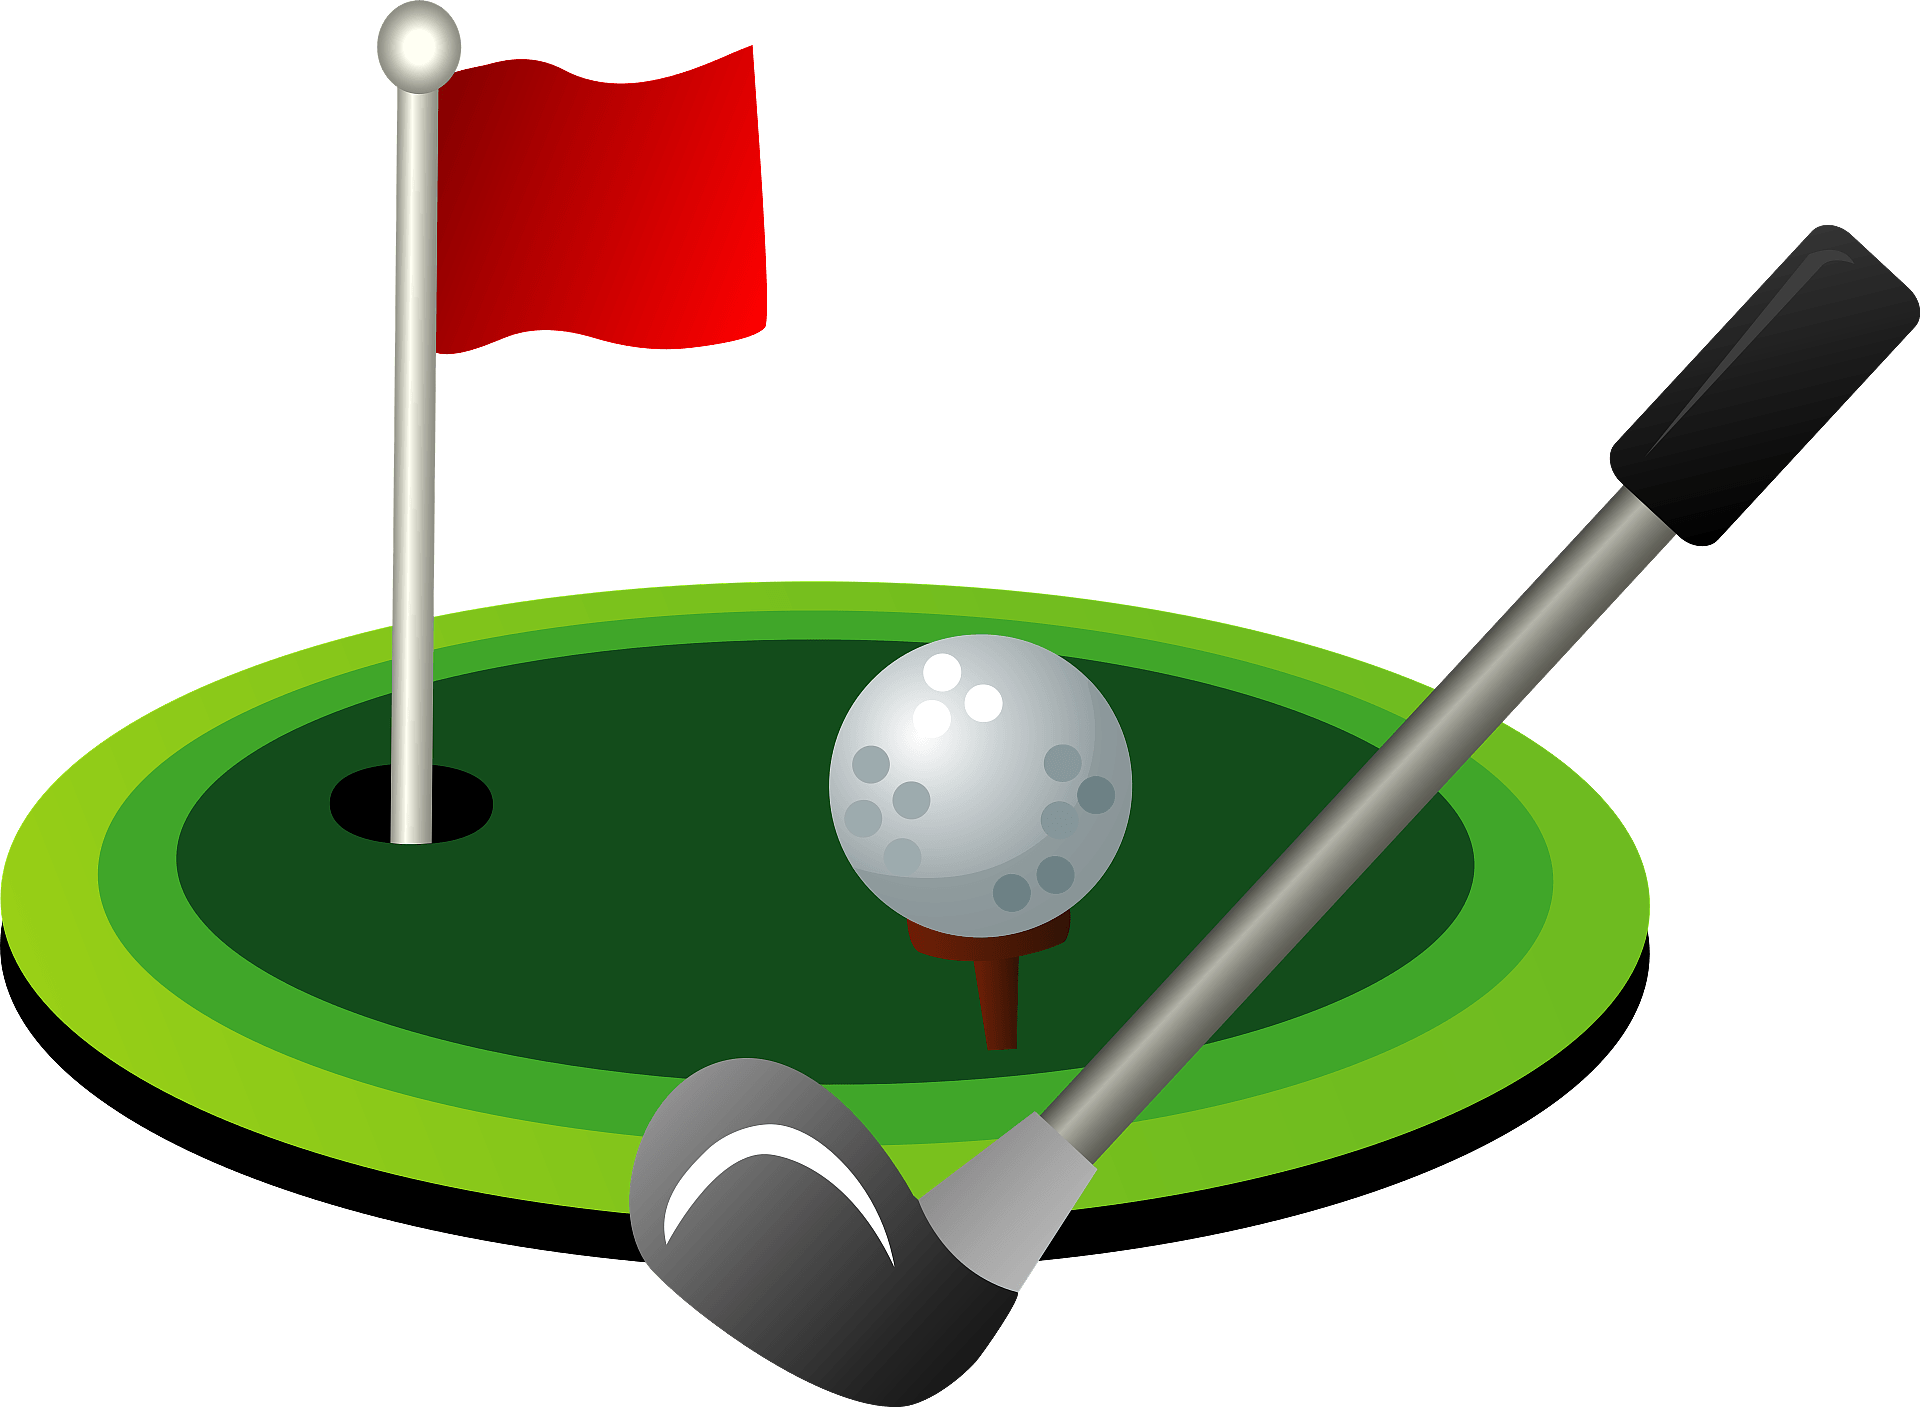 golf images clipart